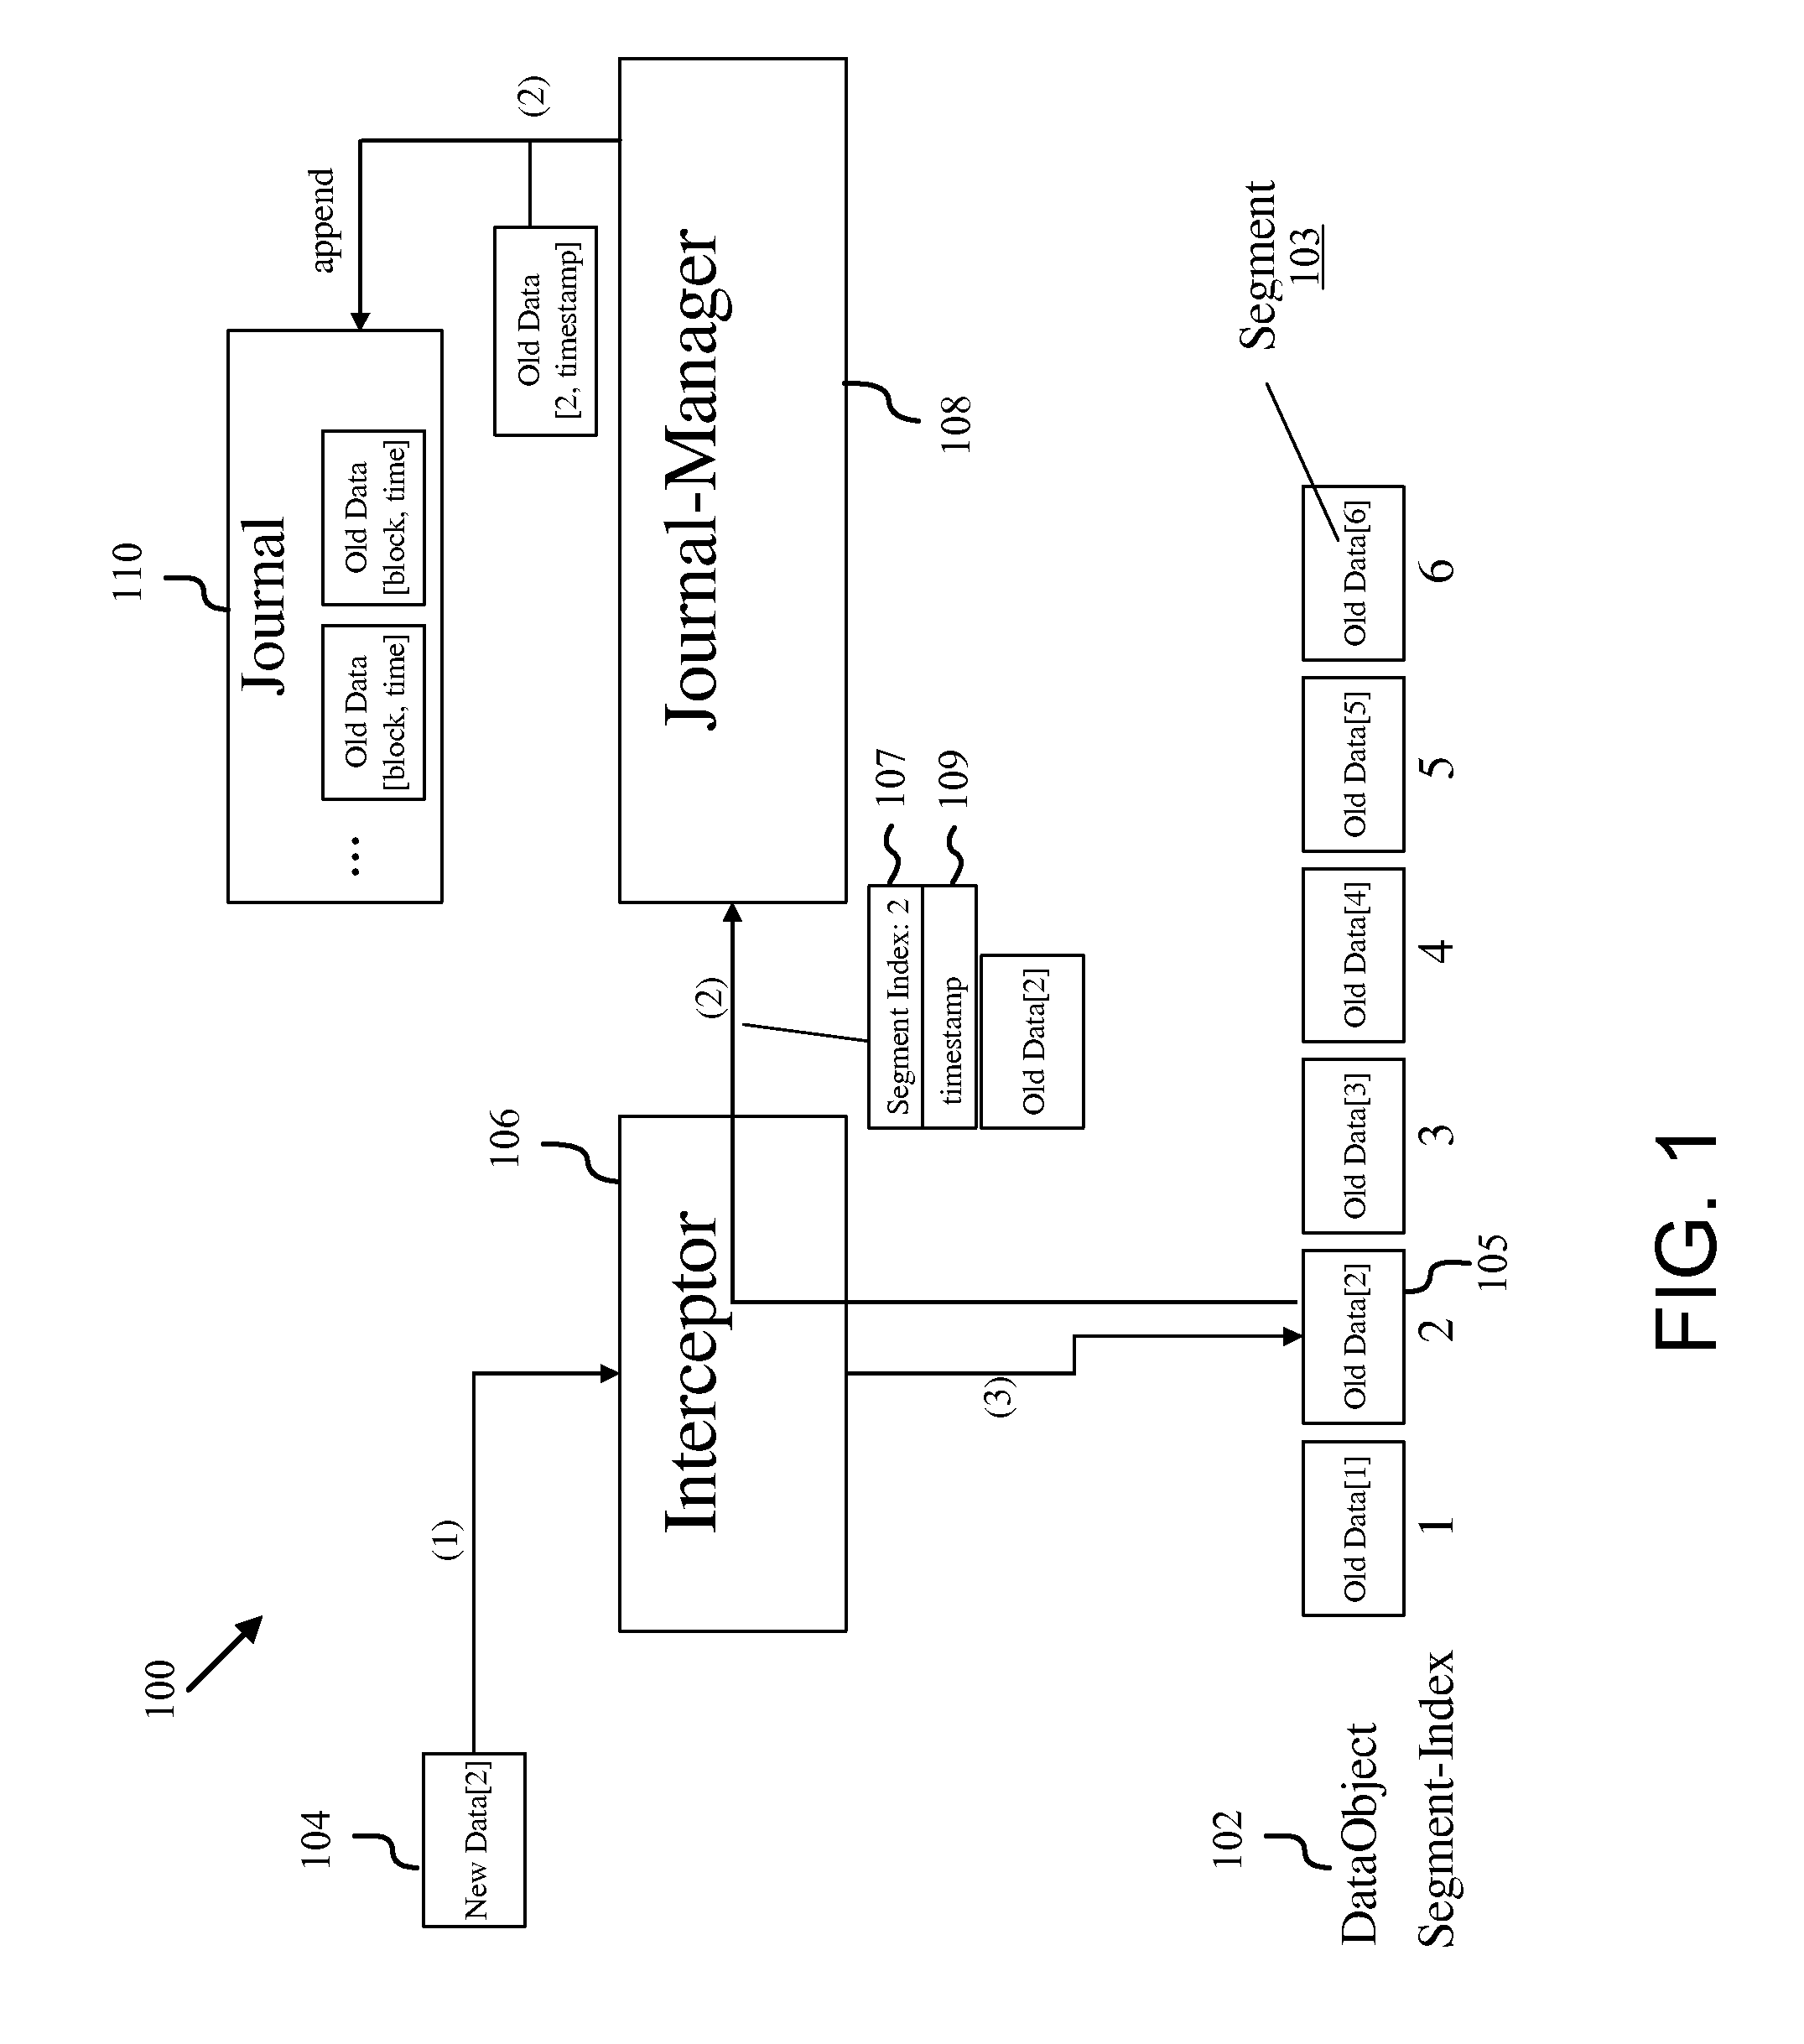 Methods and infrastructure for performing repetitive data protection and a corresponding restore of data